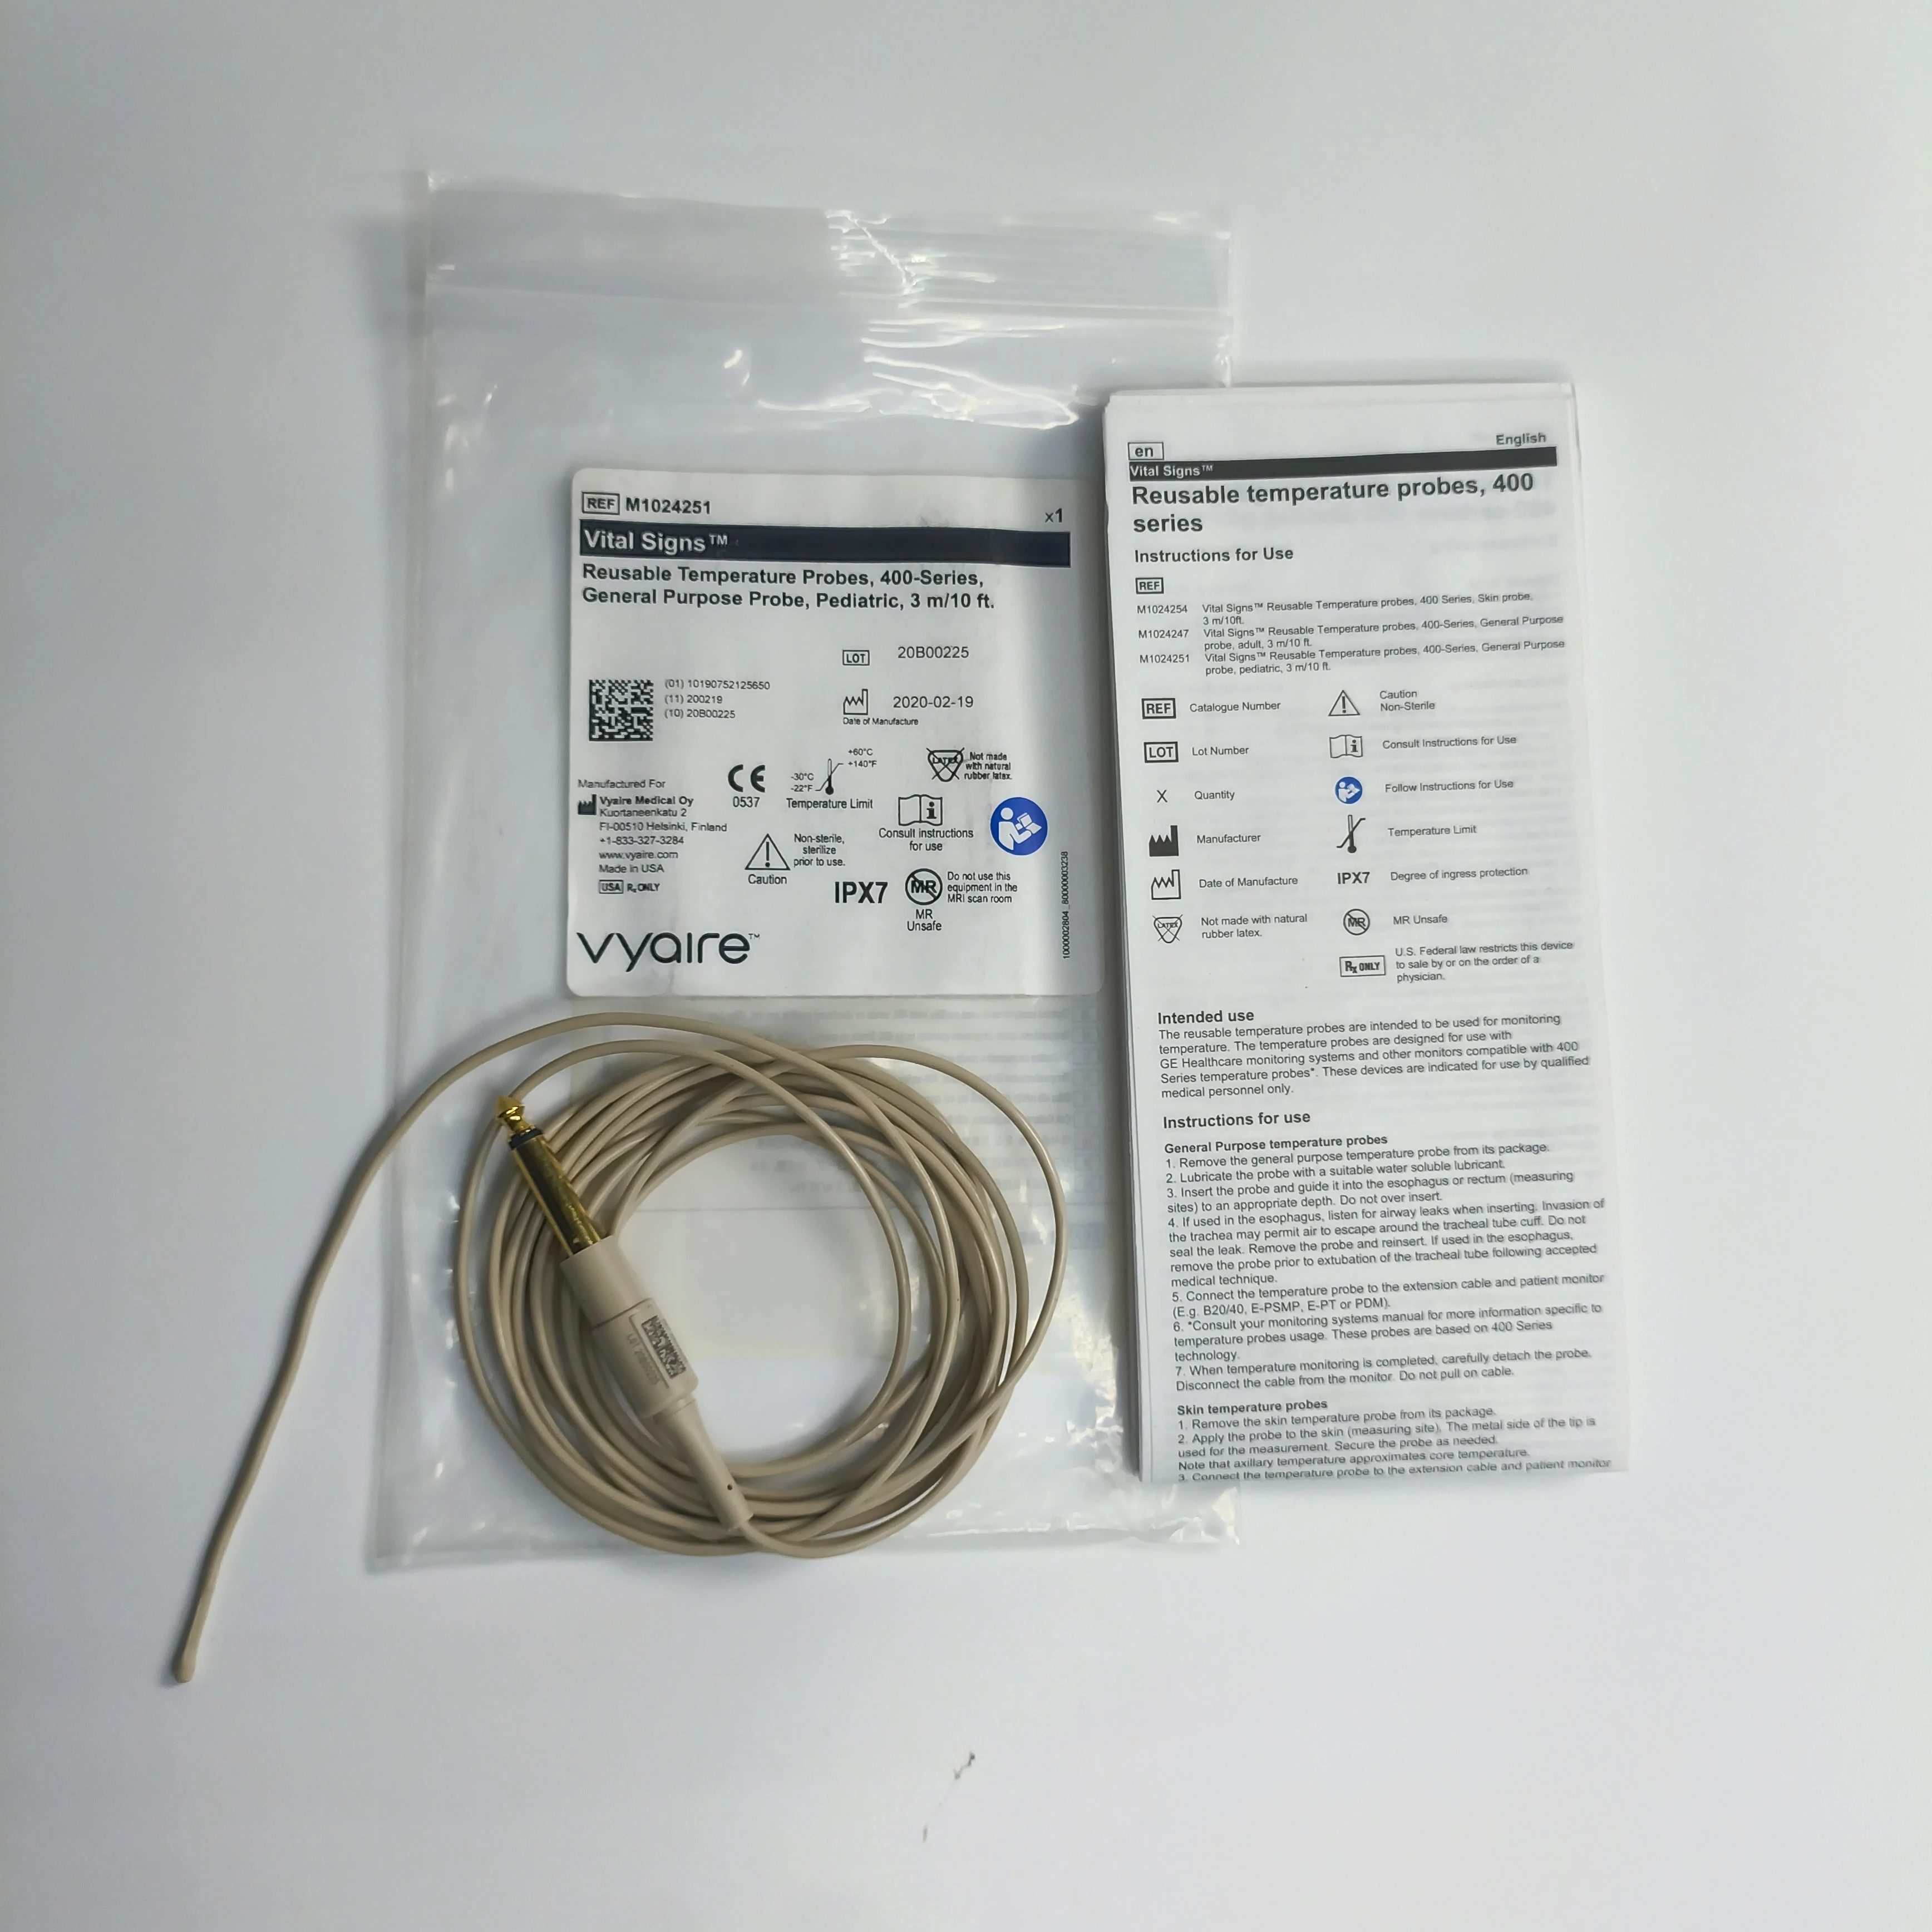 Vyaire Medical #M1024251 Temperature Probe Level 1® 400 Series Esophageal / Rectal